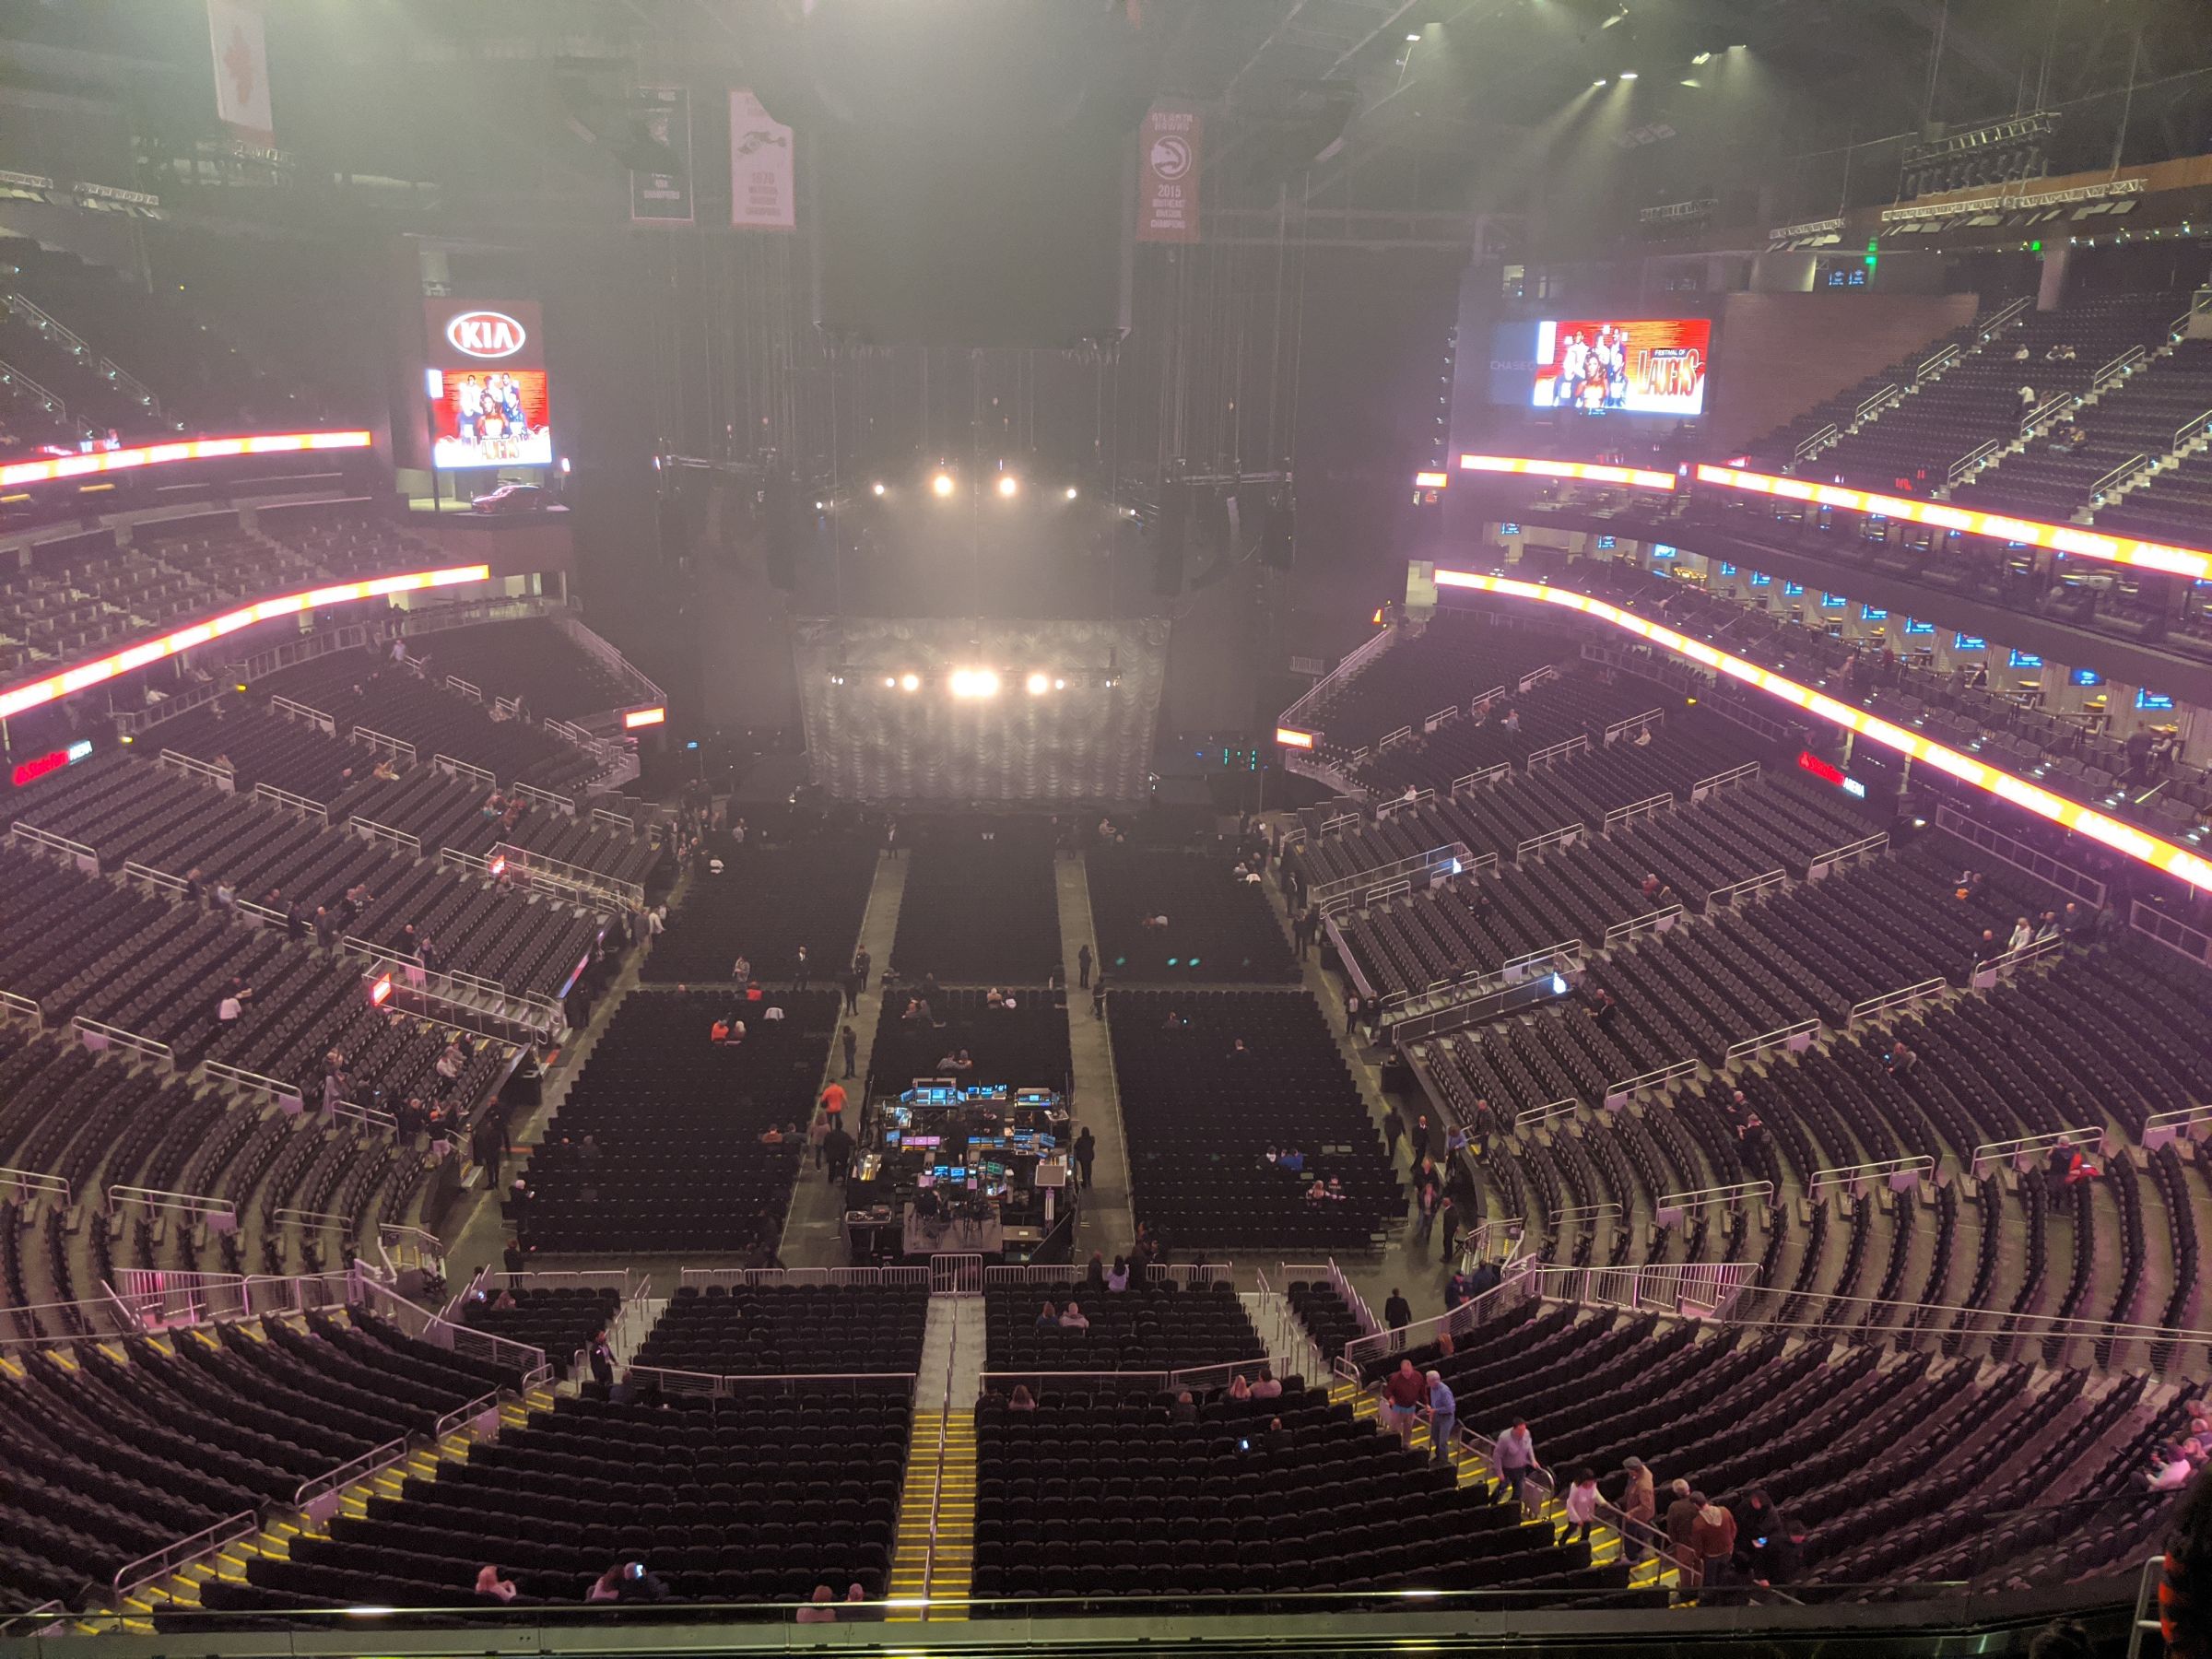 Section 203 at State Farm Arena